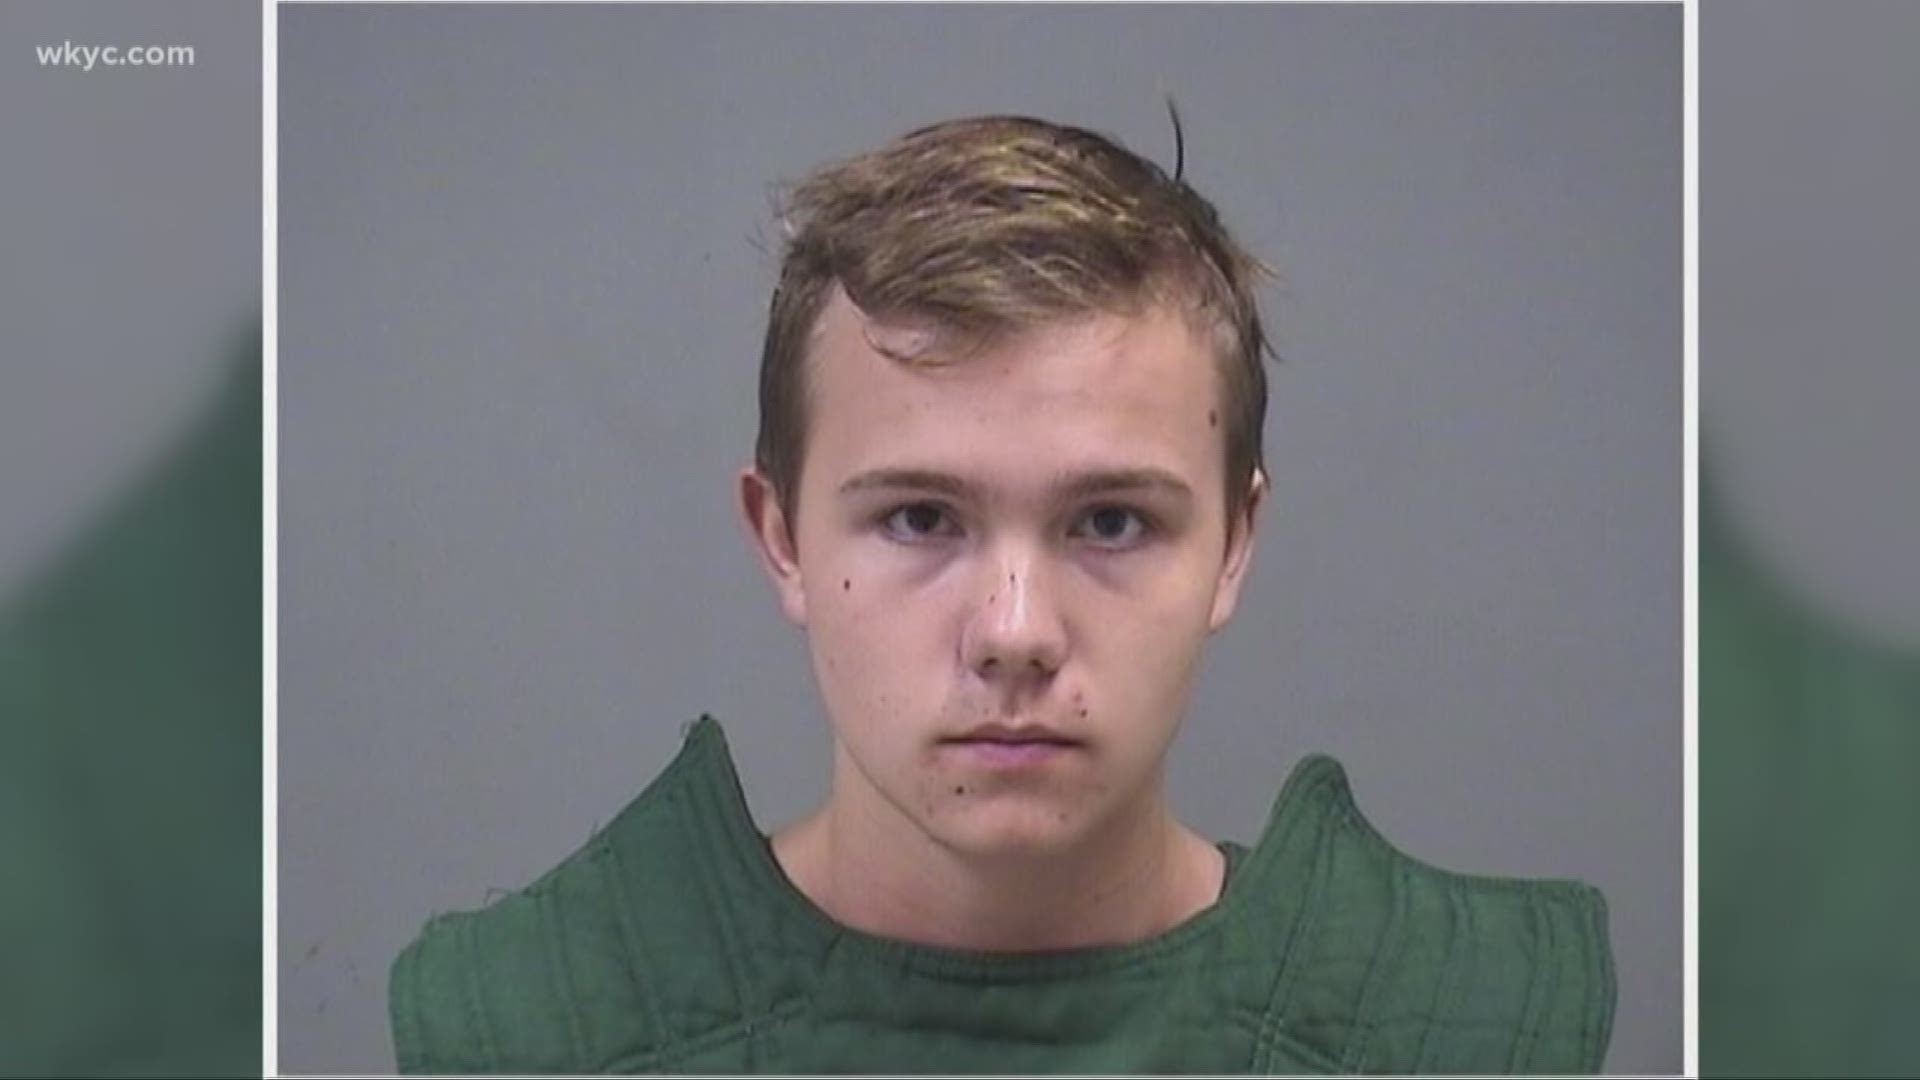 Prosecutors say an 18-year-old Mahoning County man charged with making online threats against federal agents was arrested at a home filled with guns and a huge stockpile of ammunition.